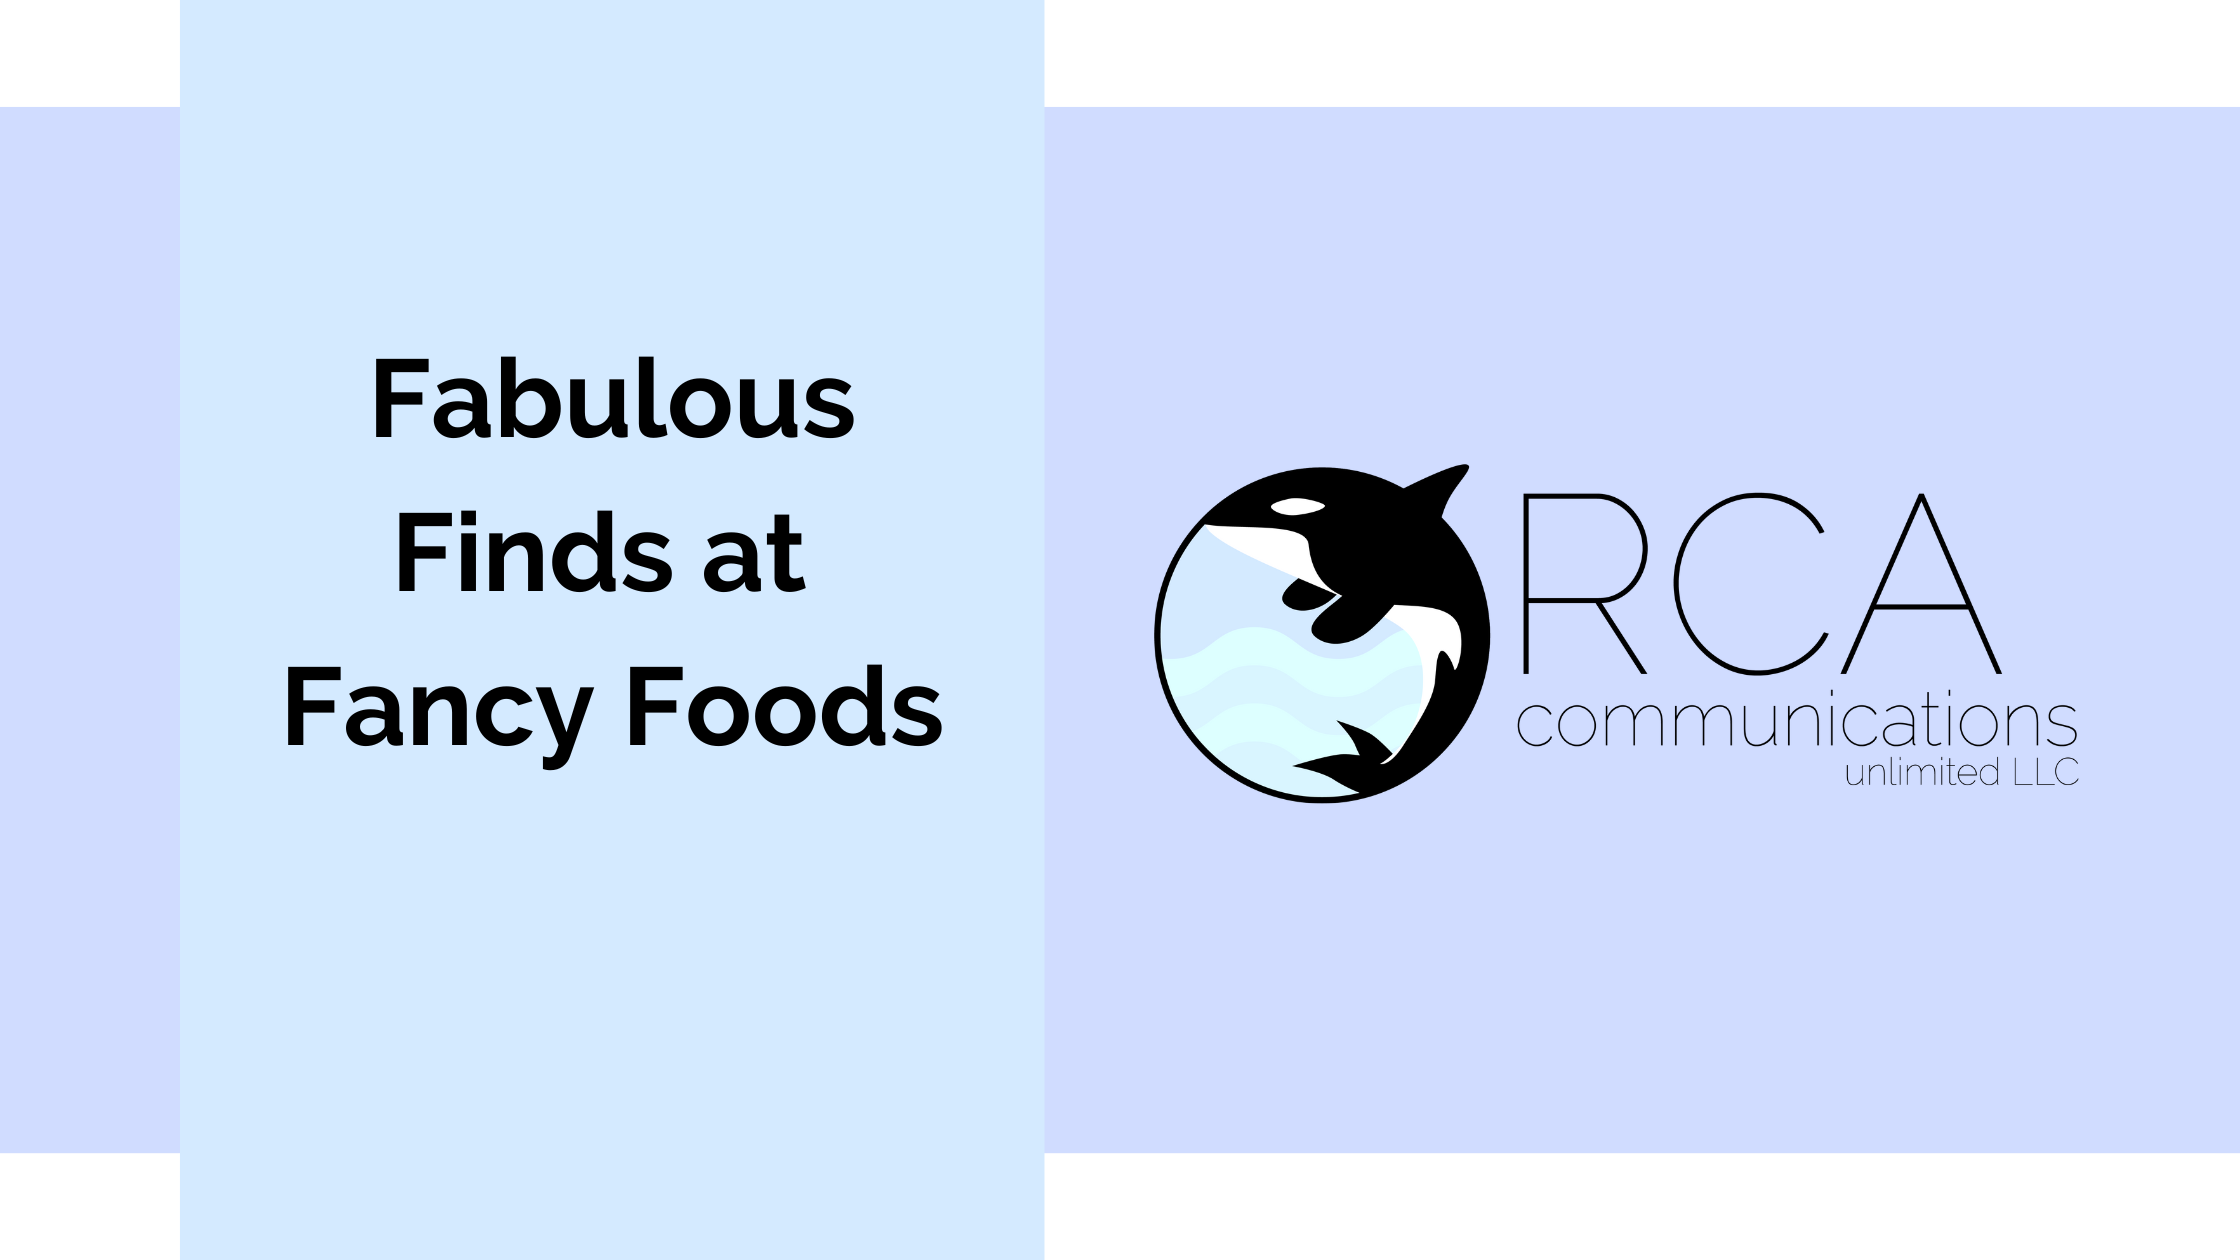 Fabulous Finds at Fancy Foods - Orca Communications